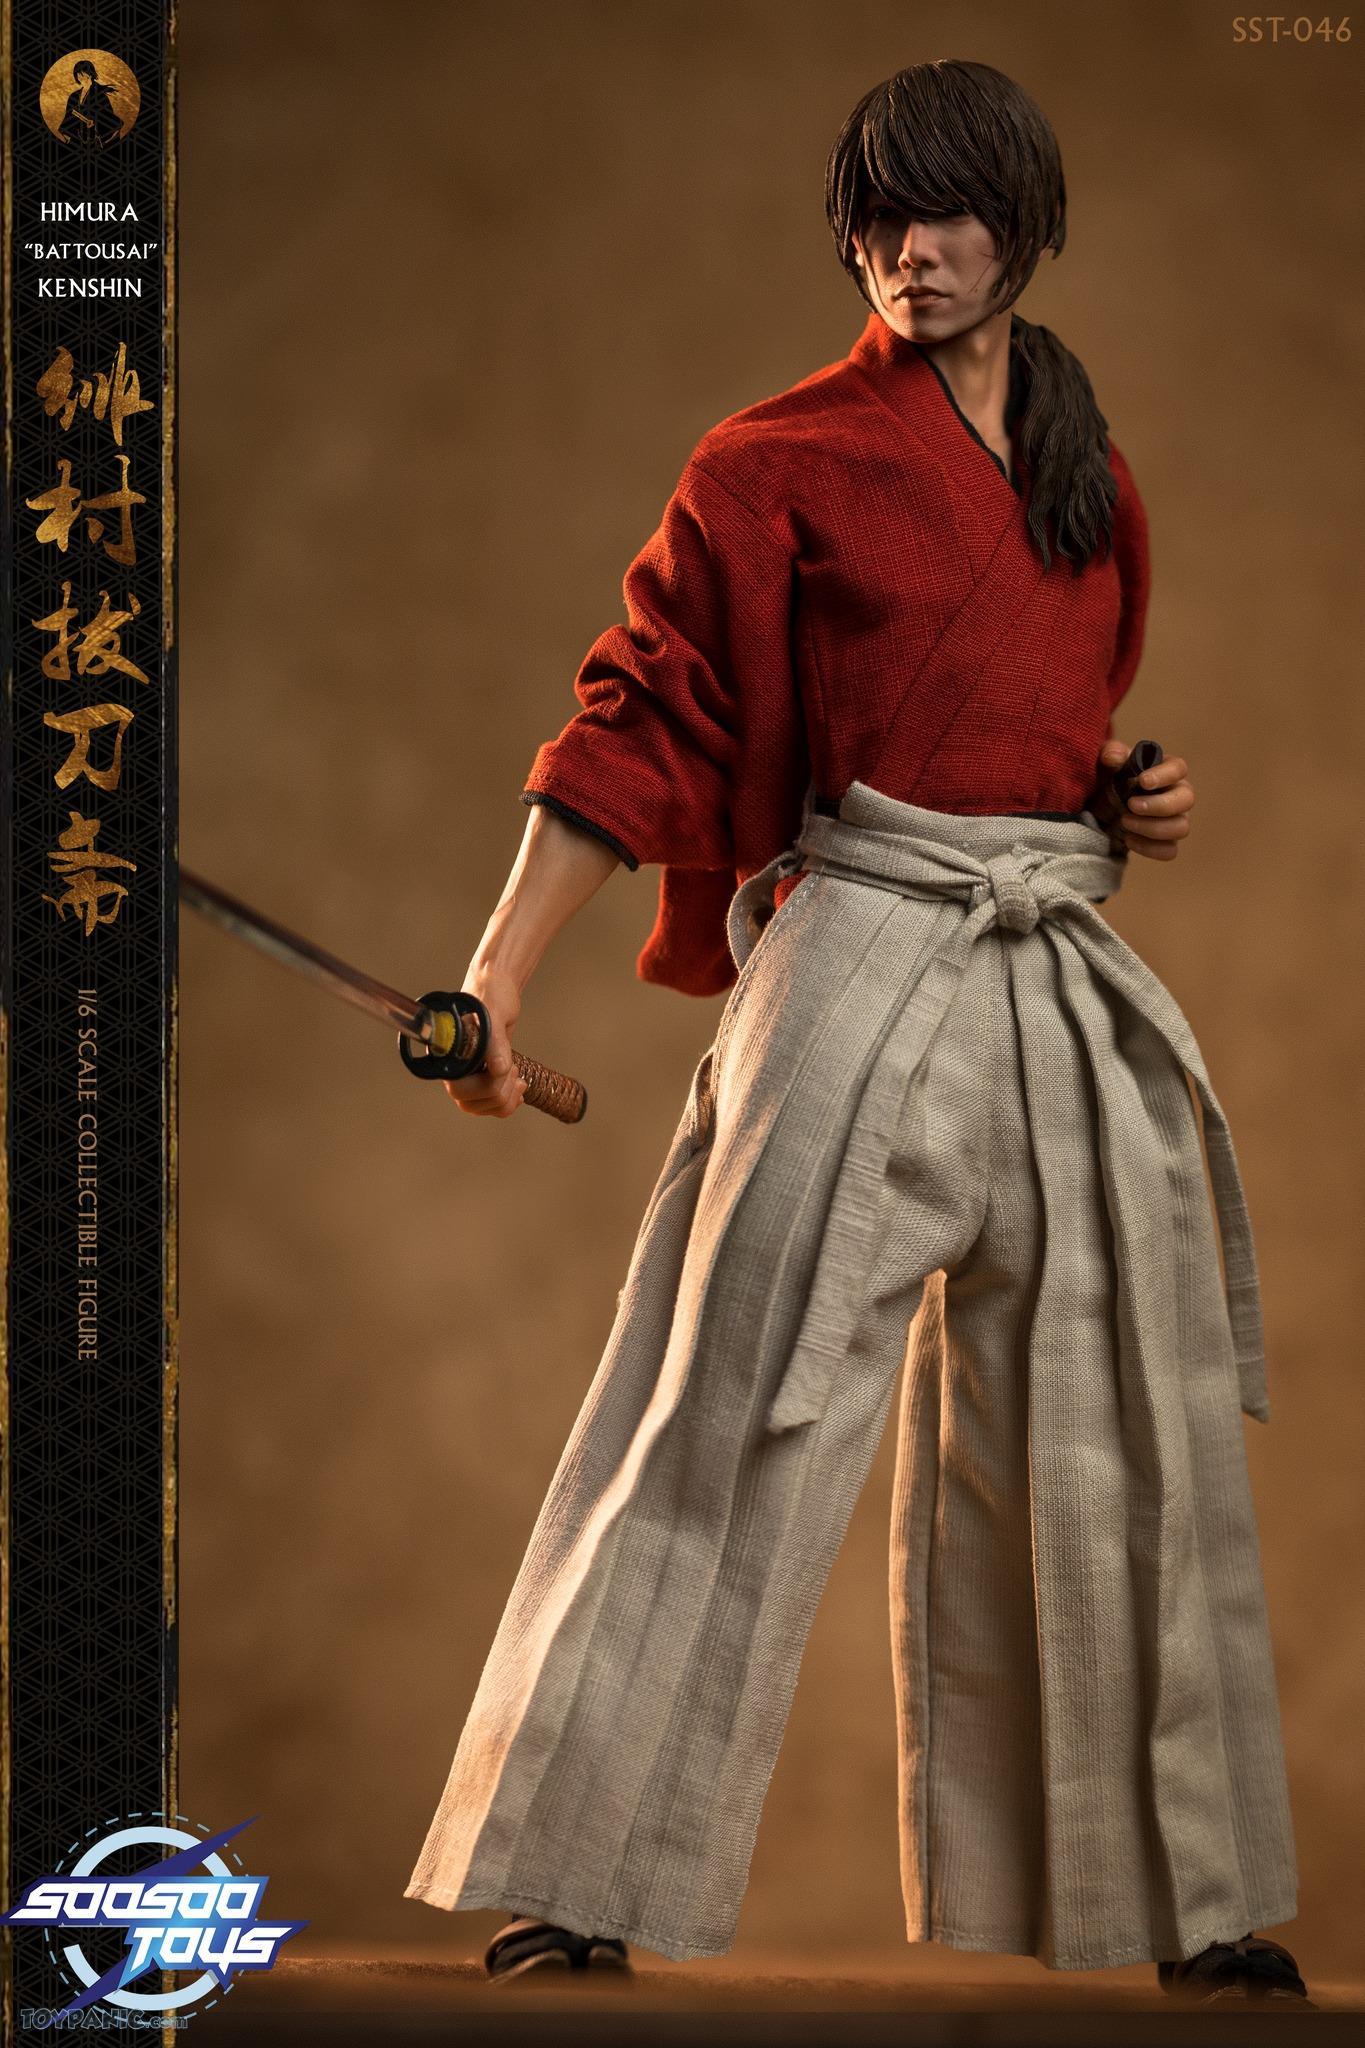 NEW PRODUCT: 1/6 scale Rurouni Kenshin Collectible Figure from SooSooToys 712202251232PM_7300100